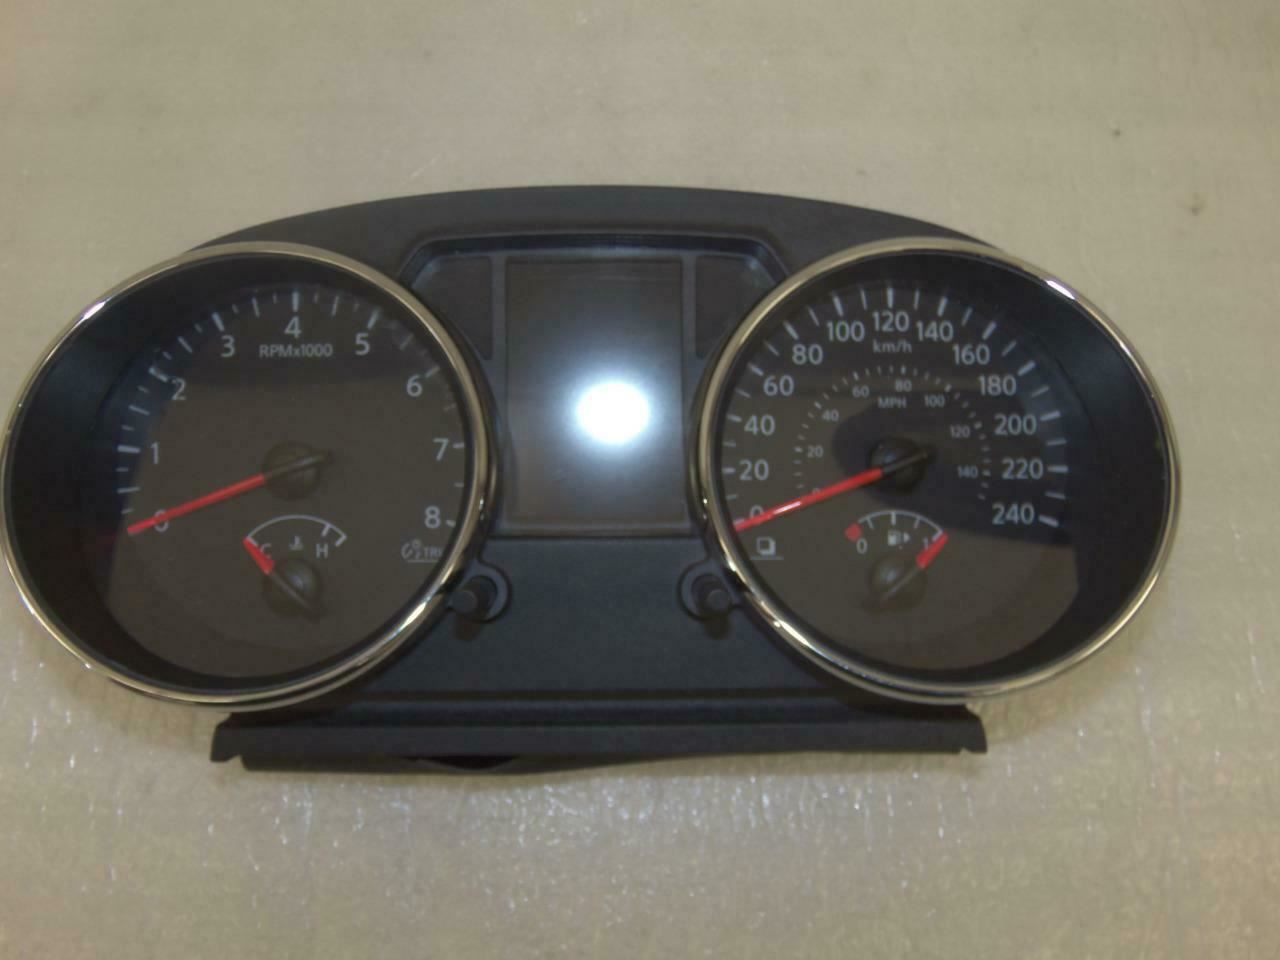 NISSAN ROGUE 2011 OEM CLUSTER SPEEDOMETER 1VK1A AUTOMATIC KM/H 24810 KM